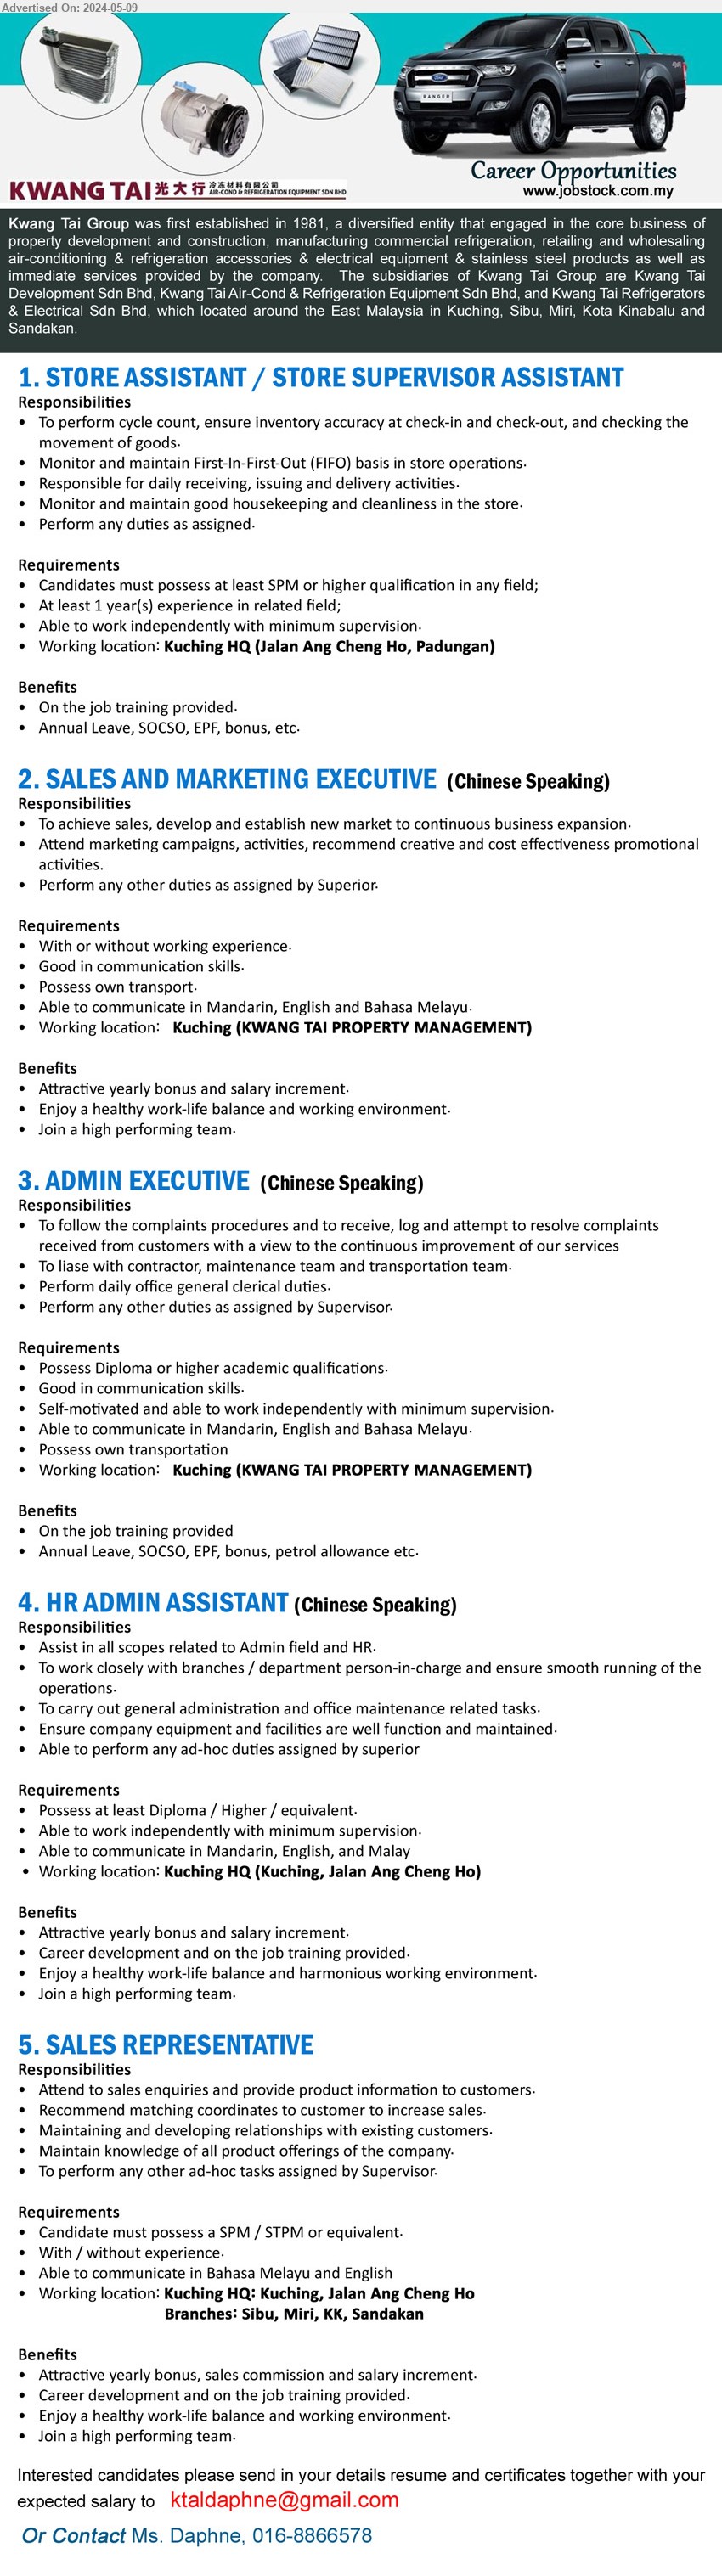 KWANG TAI GROUP - 1. STORE ASSISTANT / STORE SUPERVISOR ASSISTANT (Kuching), SPM or higher qualification in any field; At least 1 year(s) experience in related field;,...
2. SALES AND MARKETING EXECUTIVE  (Kuching), With or without working experience, Good in communication skills.,...
3. ADMIN EXECUTIVE (Kuching), Diploma or higher academic, Good in communication skills.,...
4. HR ADMIN ASSISTANT (Kuching),  Diploma / Higher / equivalent, Able to work independently with minimum supervision.,...
5. SALES REPRESENTATIVE (Kuching, Sibu, Miri, KK, Sandakan), SPM / STPM or equivalent, With / without experience. ,...
Call 016-8866578 / Email resume to ...